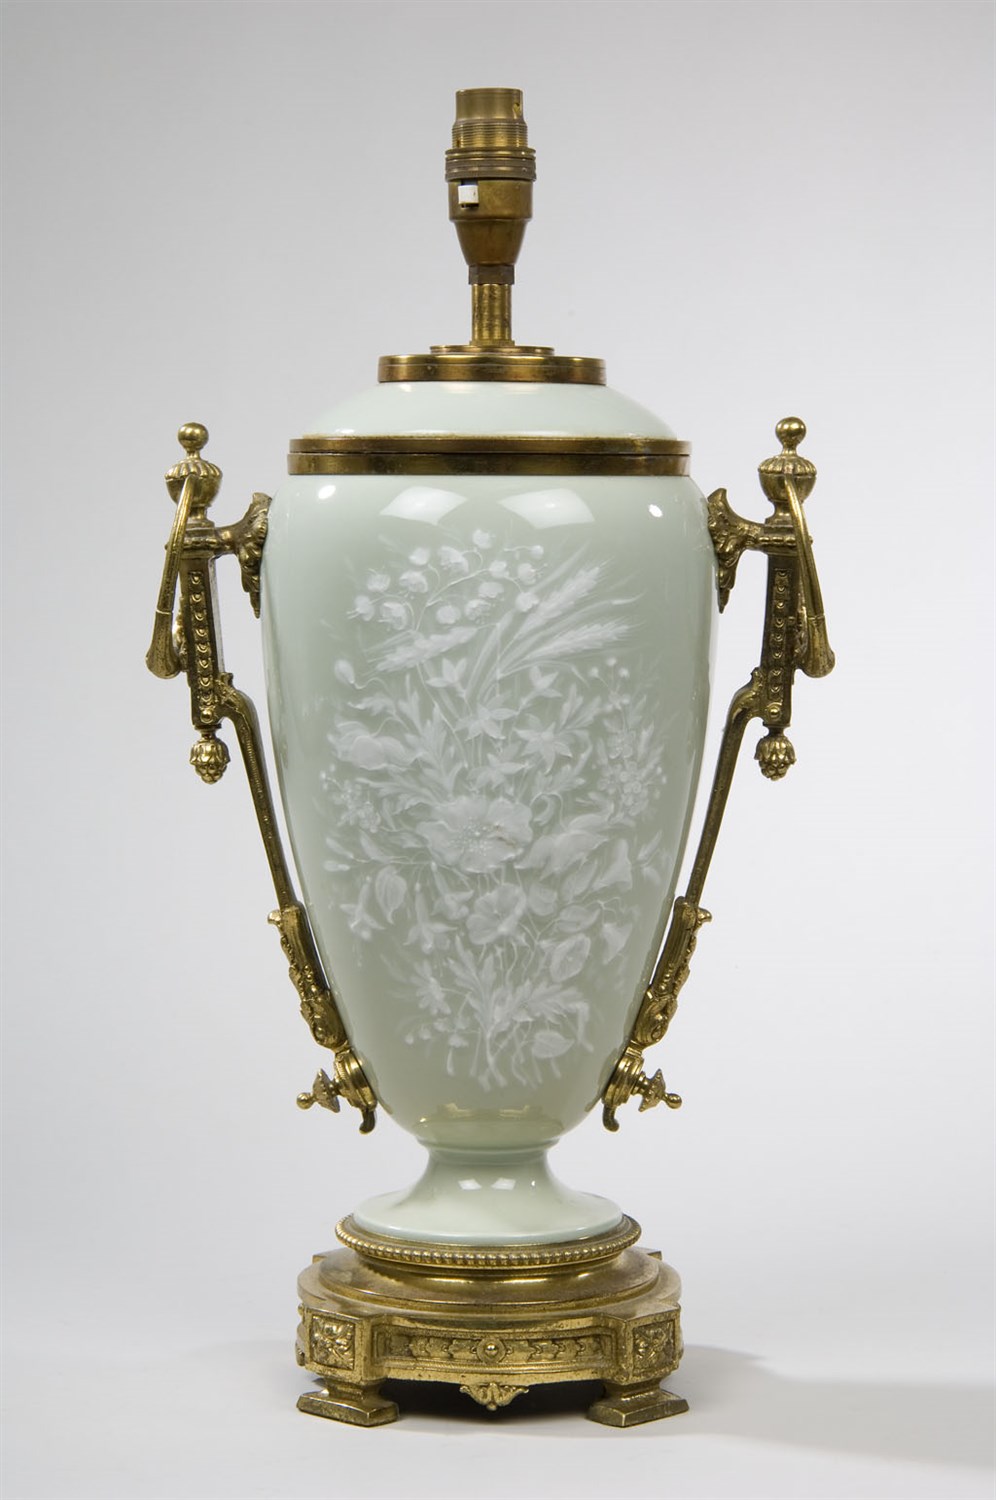 Lot 405 - A French gilt-metal-mounted porcelain lamp, late 19th century